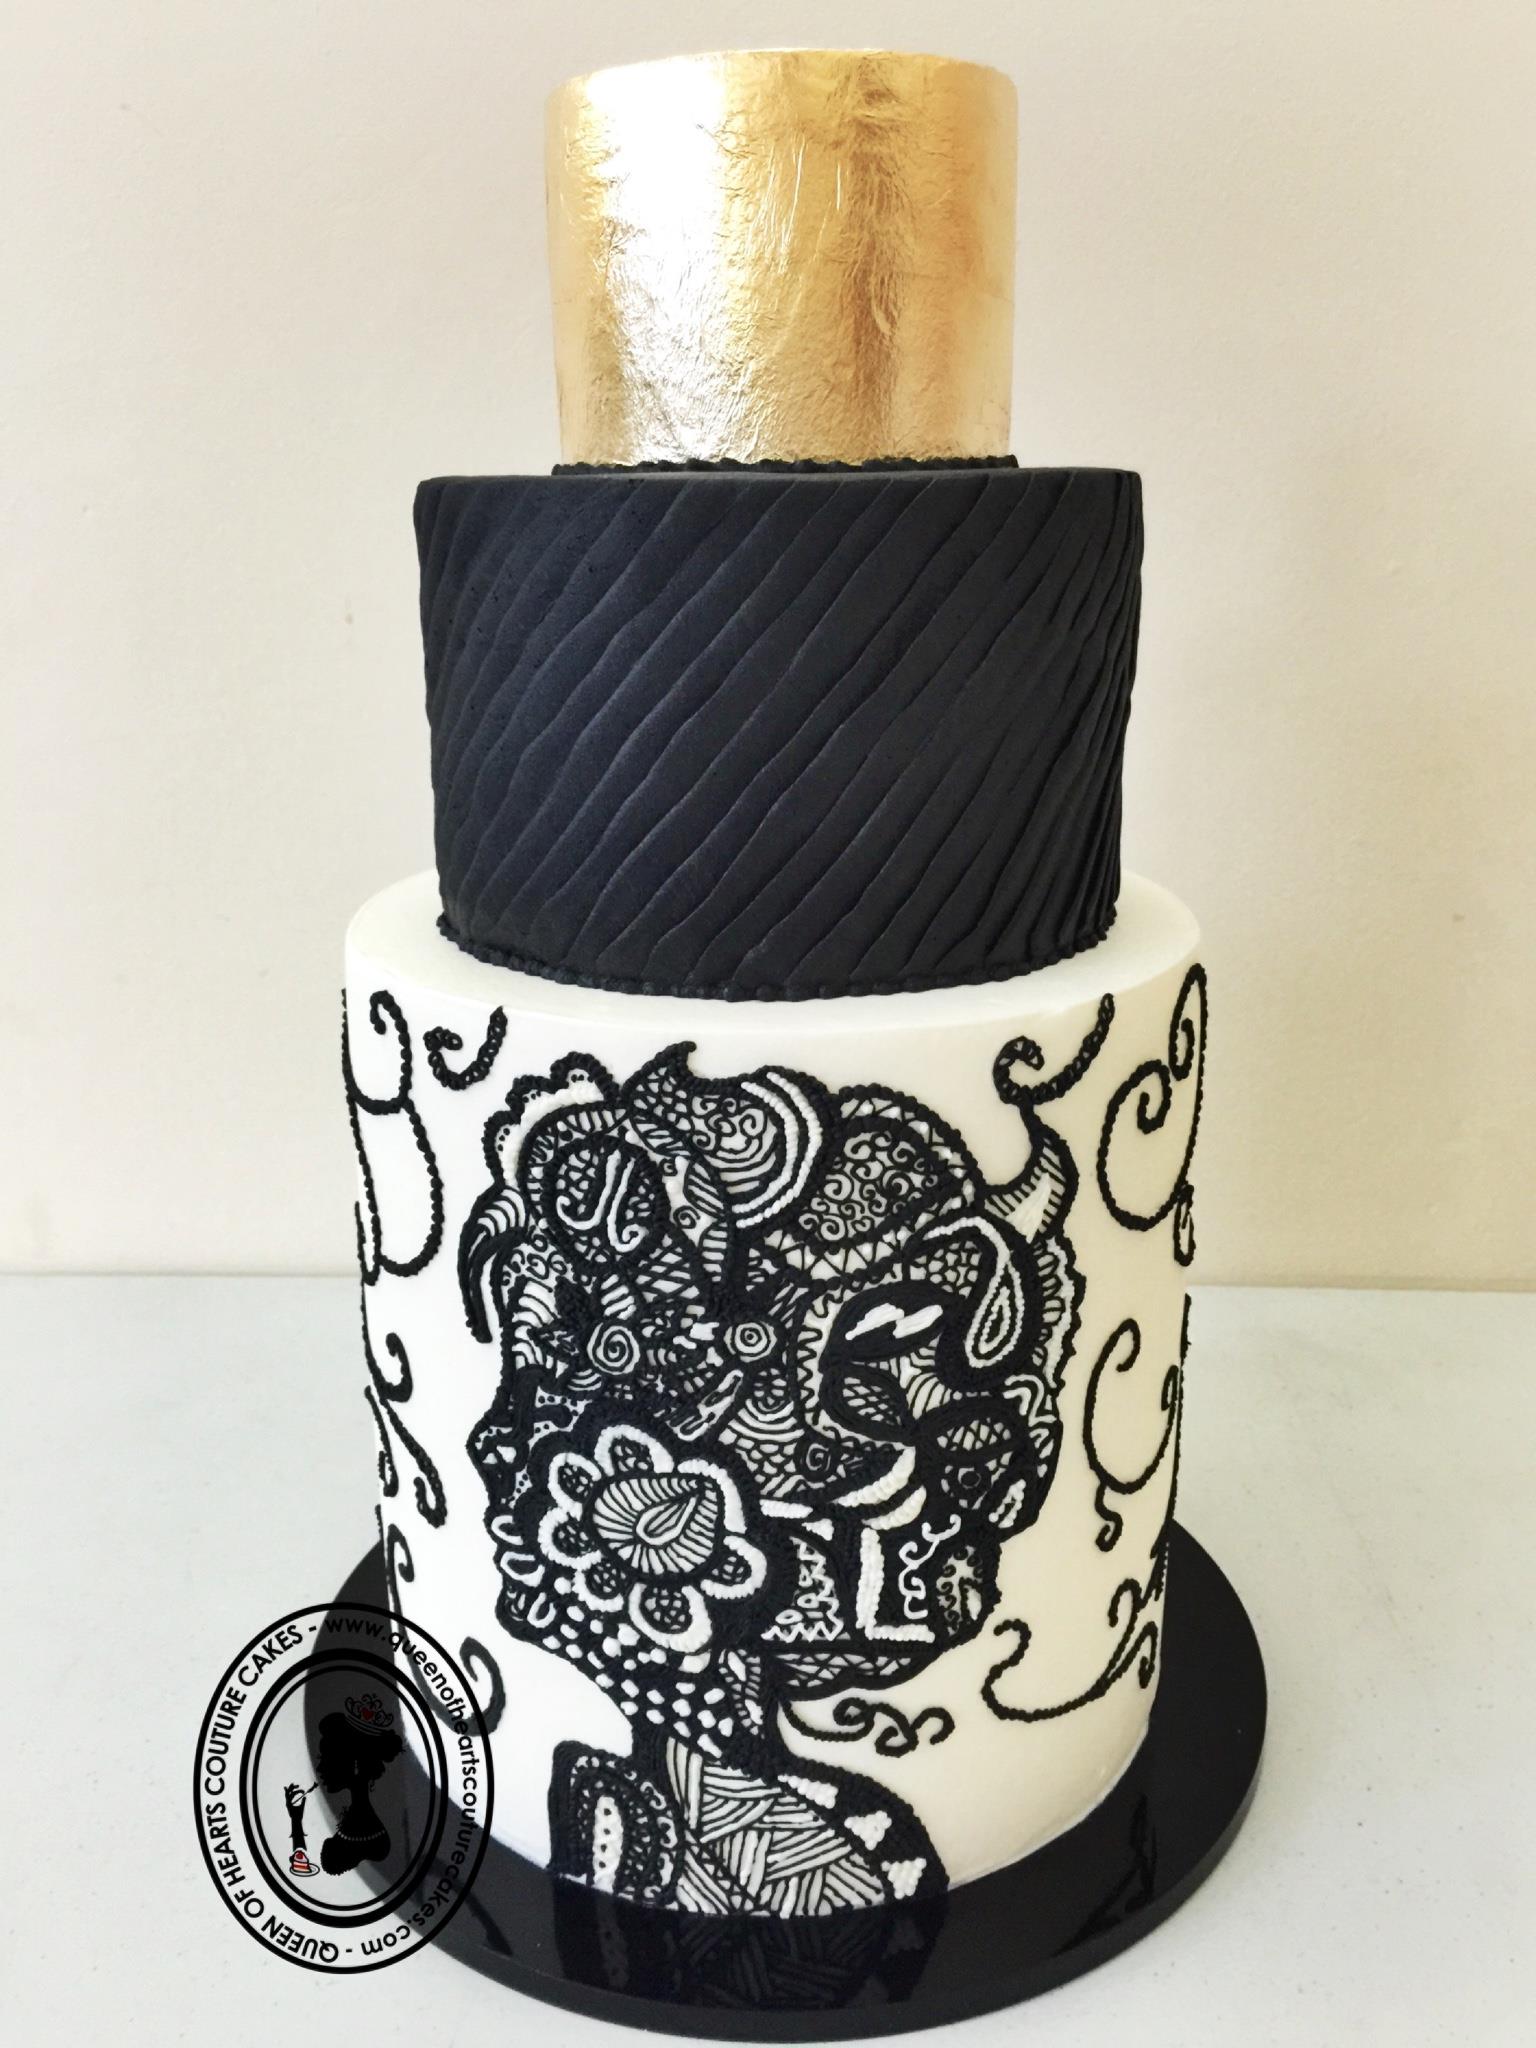 Christina Ong, Valeri Valeriano, Queen of Hearts Couture Cakes, buttercream